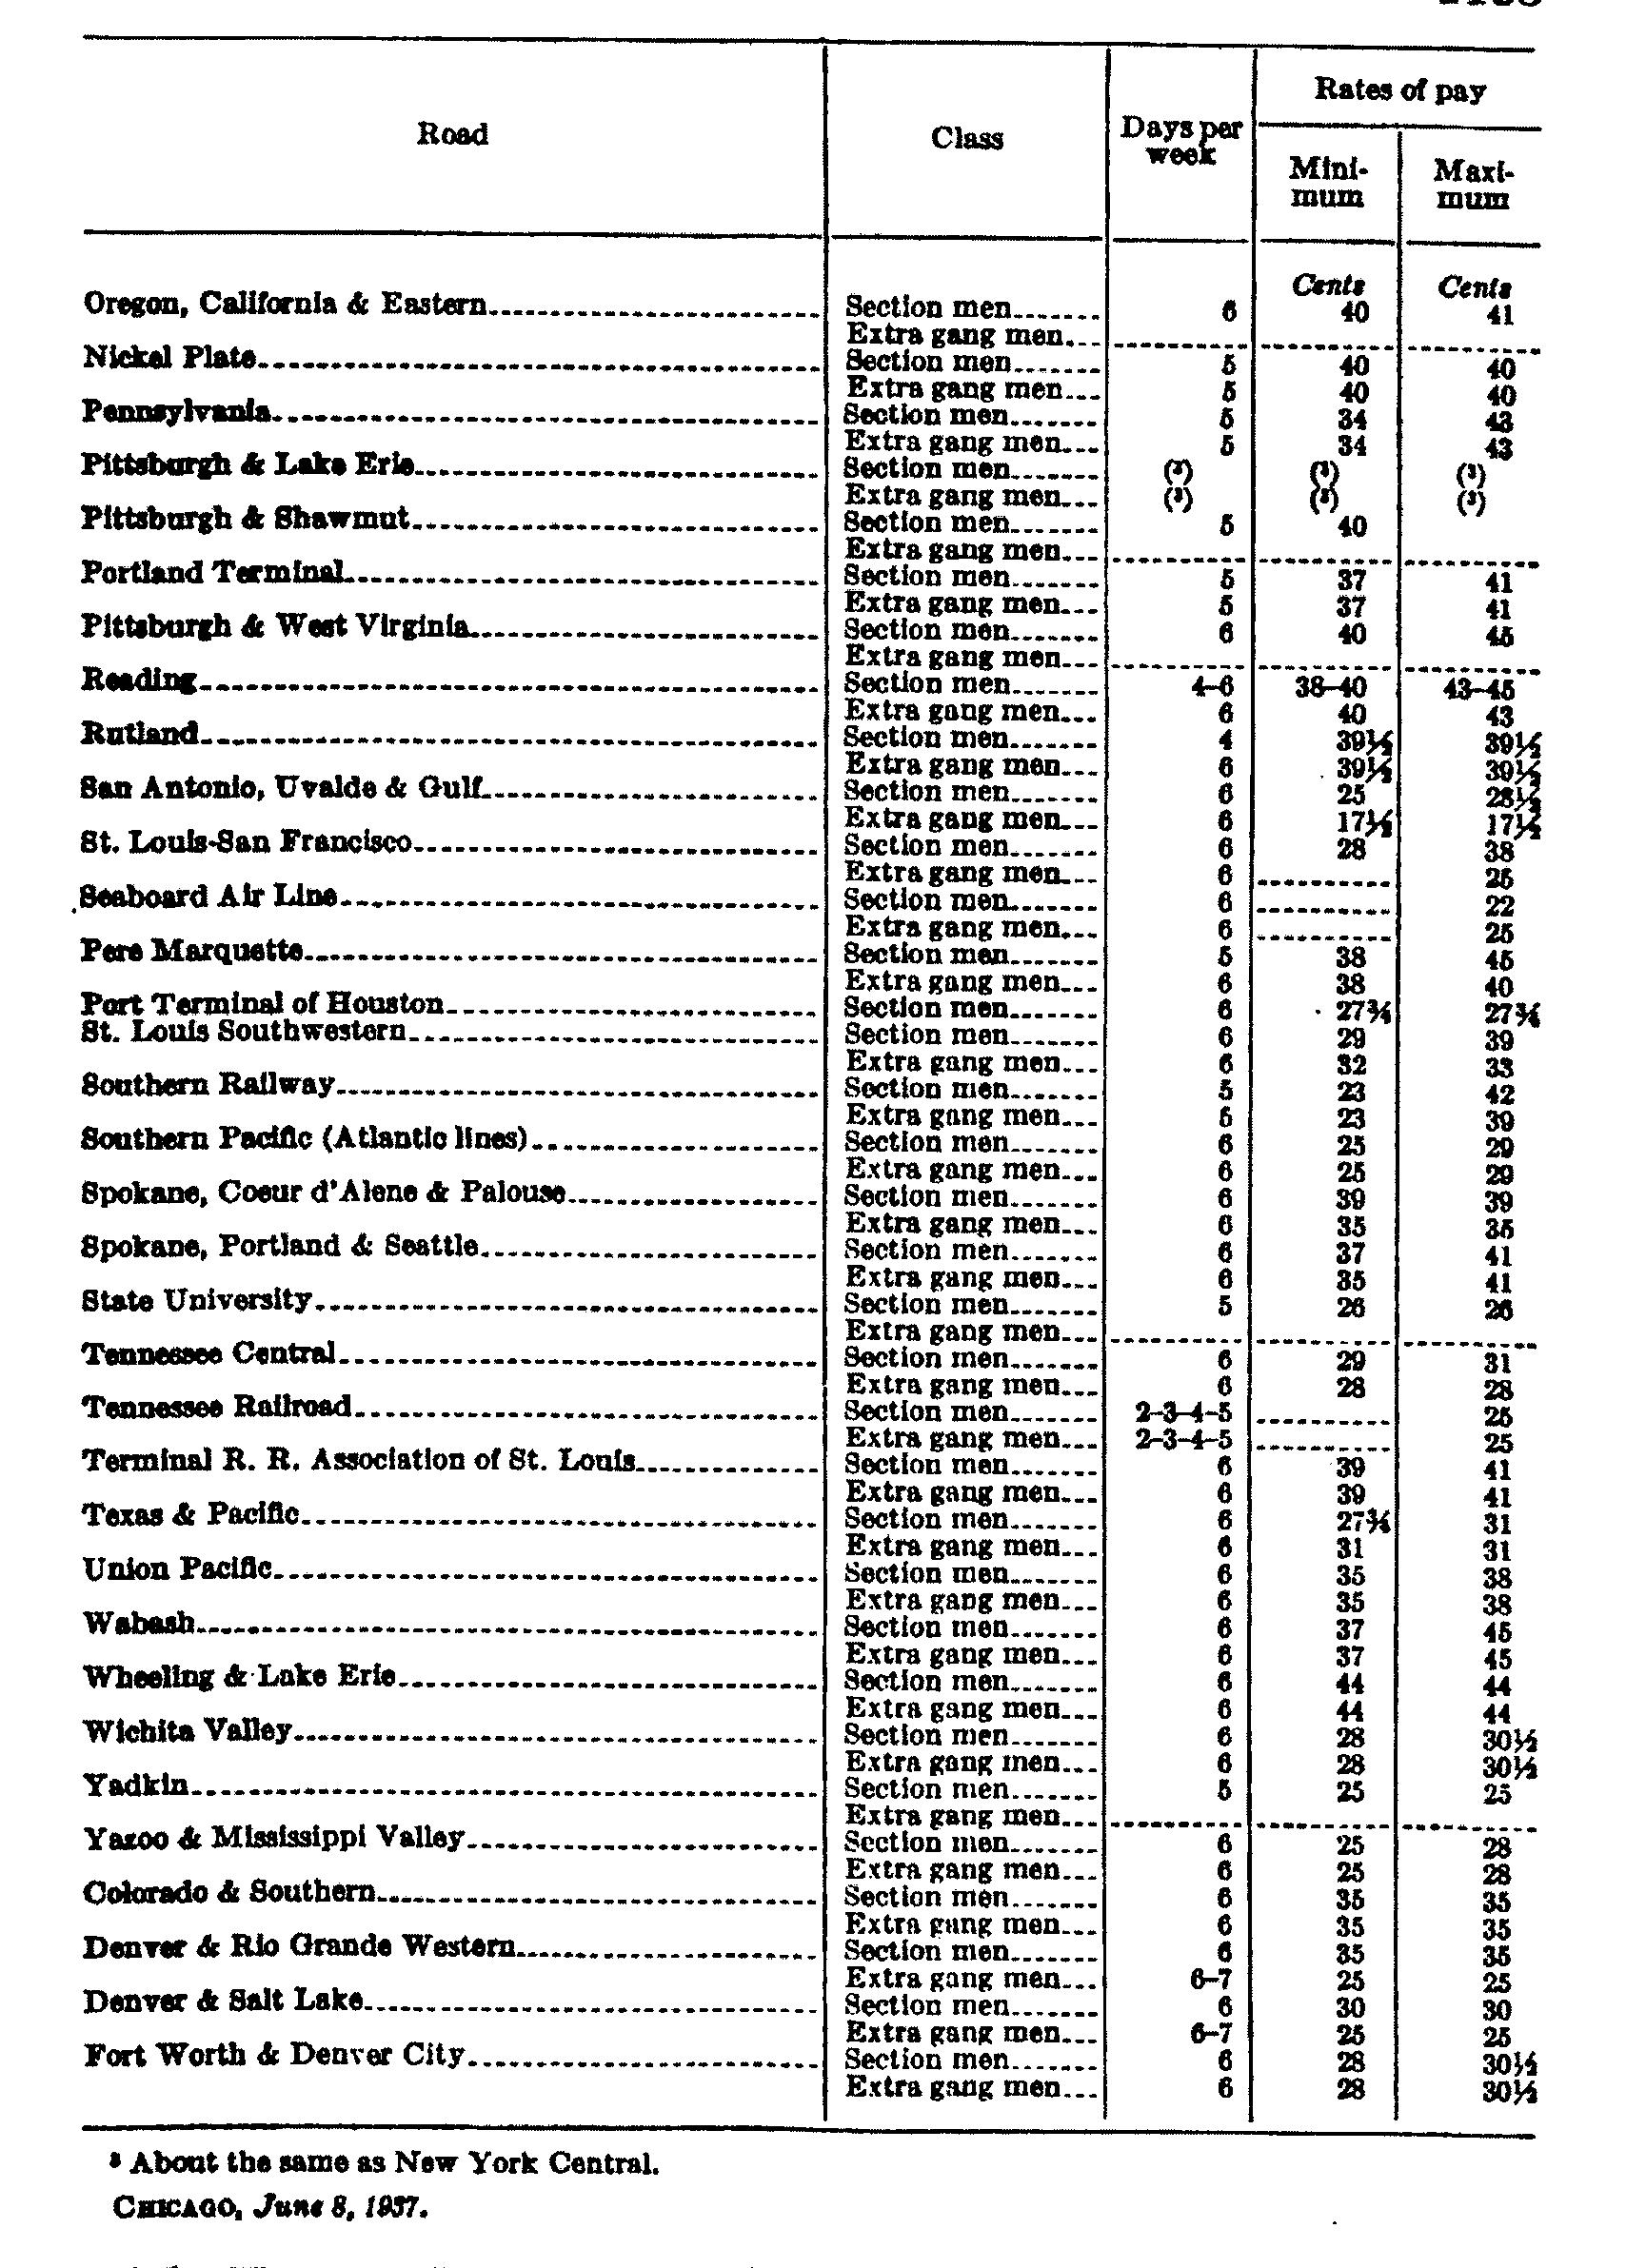 Page 1153 Railroad Wages